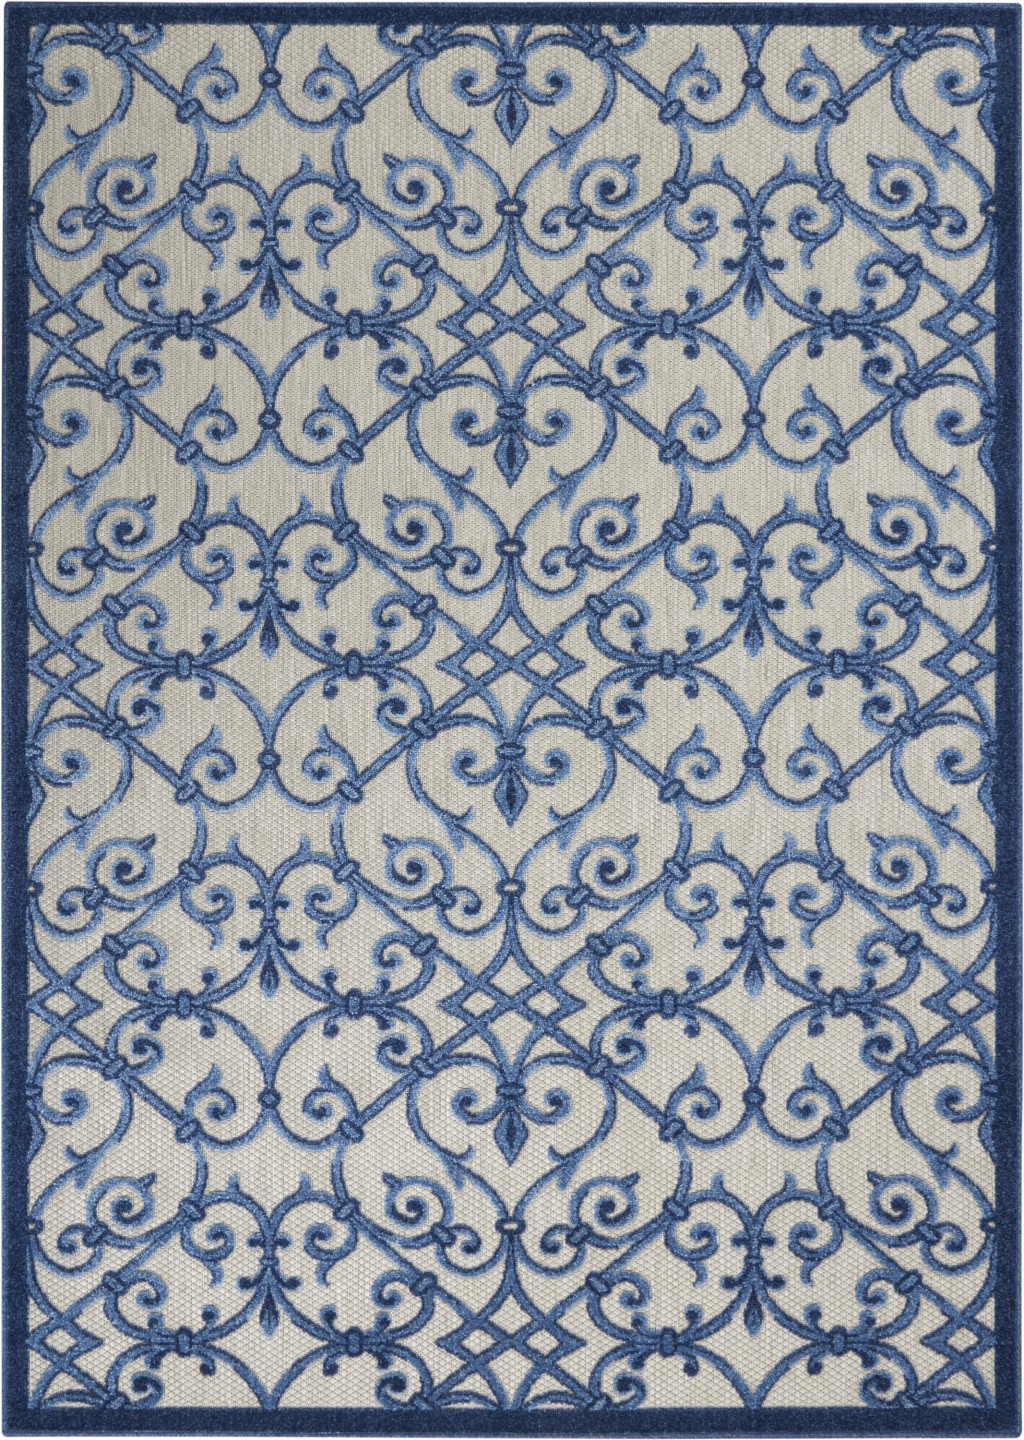 4' X 6' Blue And Gray Floral Indoor Outdoor Area Rug-385007-1